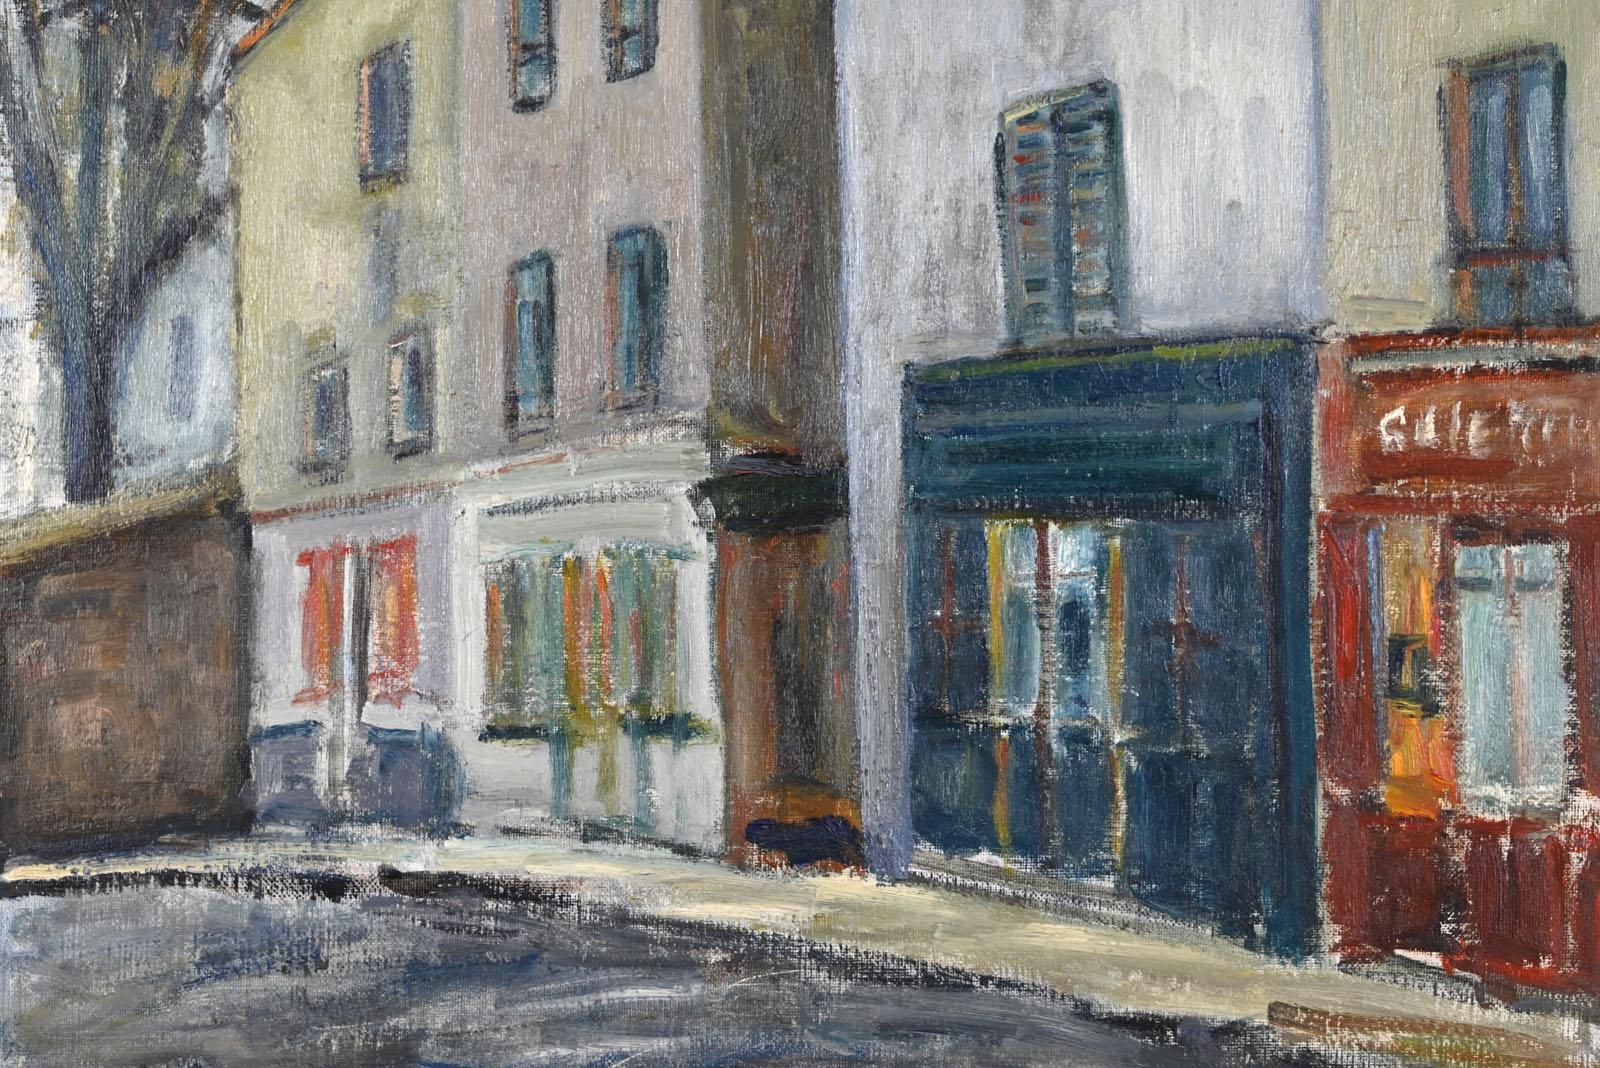 Lyne SEYBEL (1919-2009)
Vieux Montmartre

Oil on canvas
Size: 61 x 50 cm
Signed lower left
In perfect state of conservation.
Without frame

Provenance: Family of the artist

Painting sold with invoice and certificate of authenticity.
Fast and